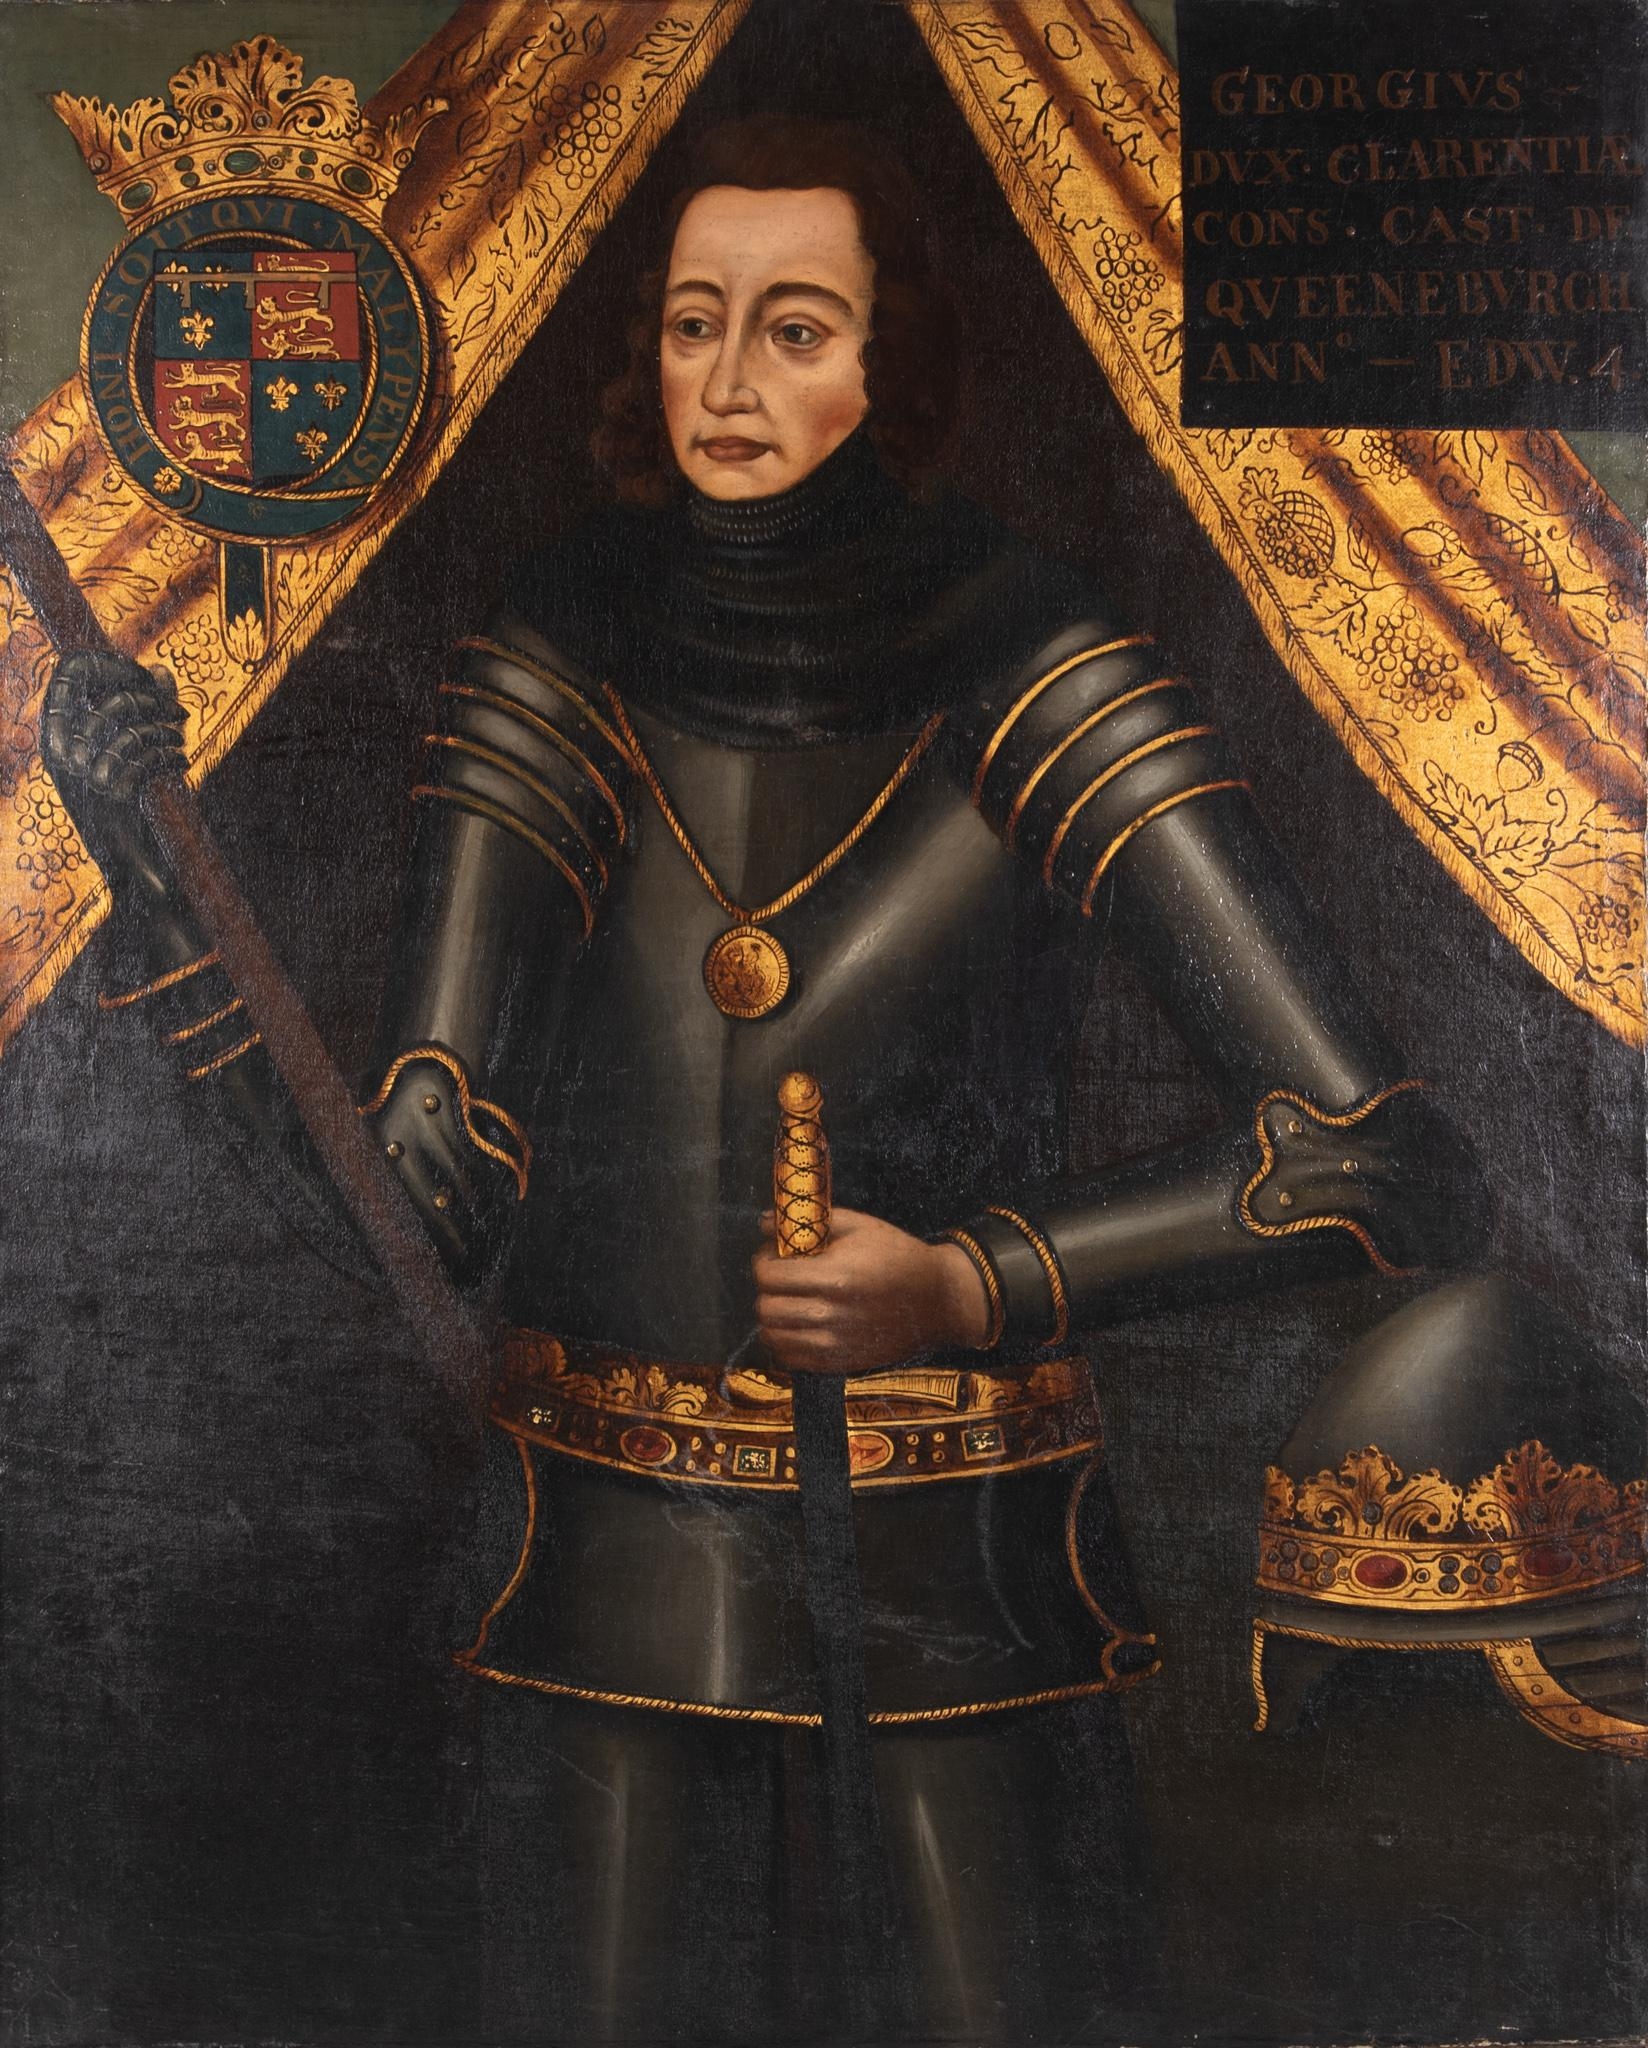 Artwork by Lucas Cornelisz de Kock, Portrait of George Plantagenet, Duke of Clarence (brother of English King Edward IV), Made of oil on canvas, mounted on masonite